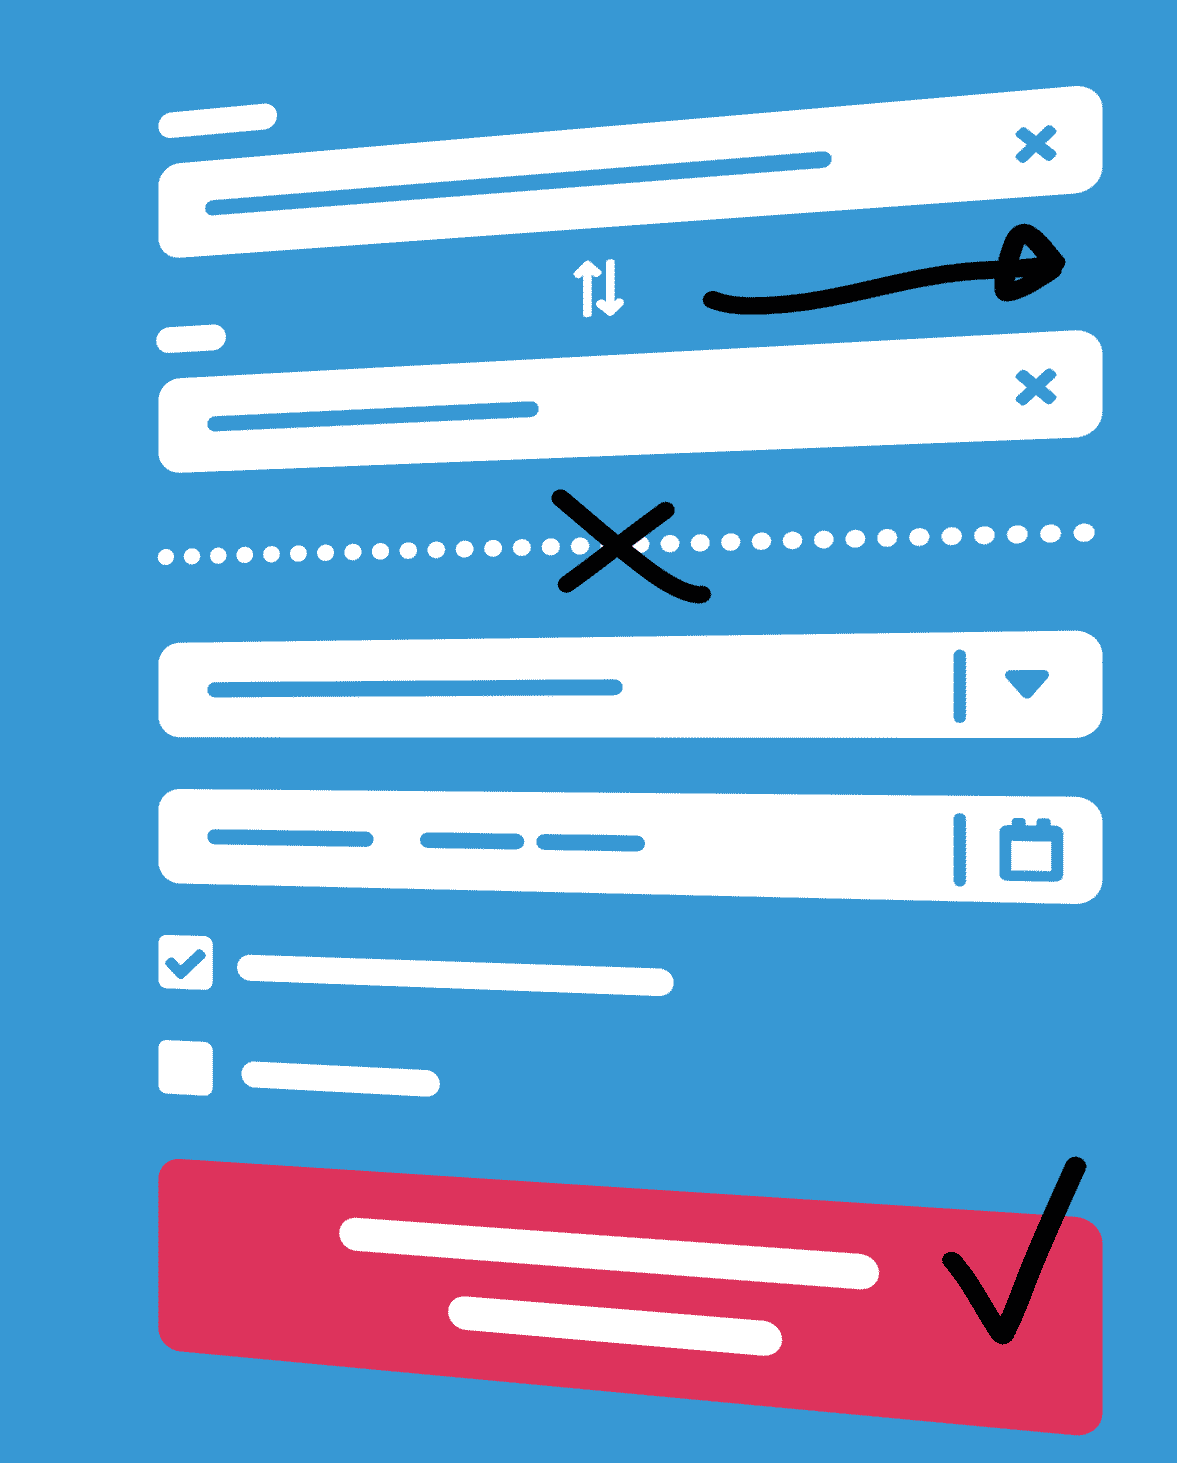 Form UX with arrows